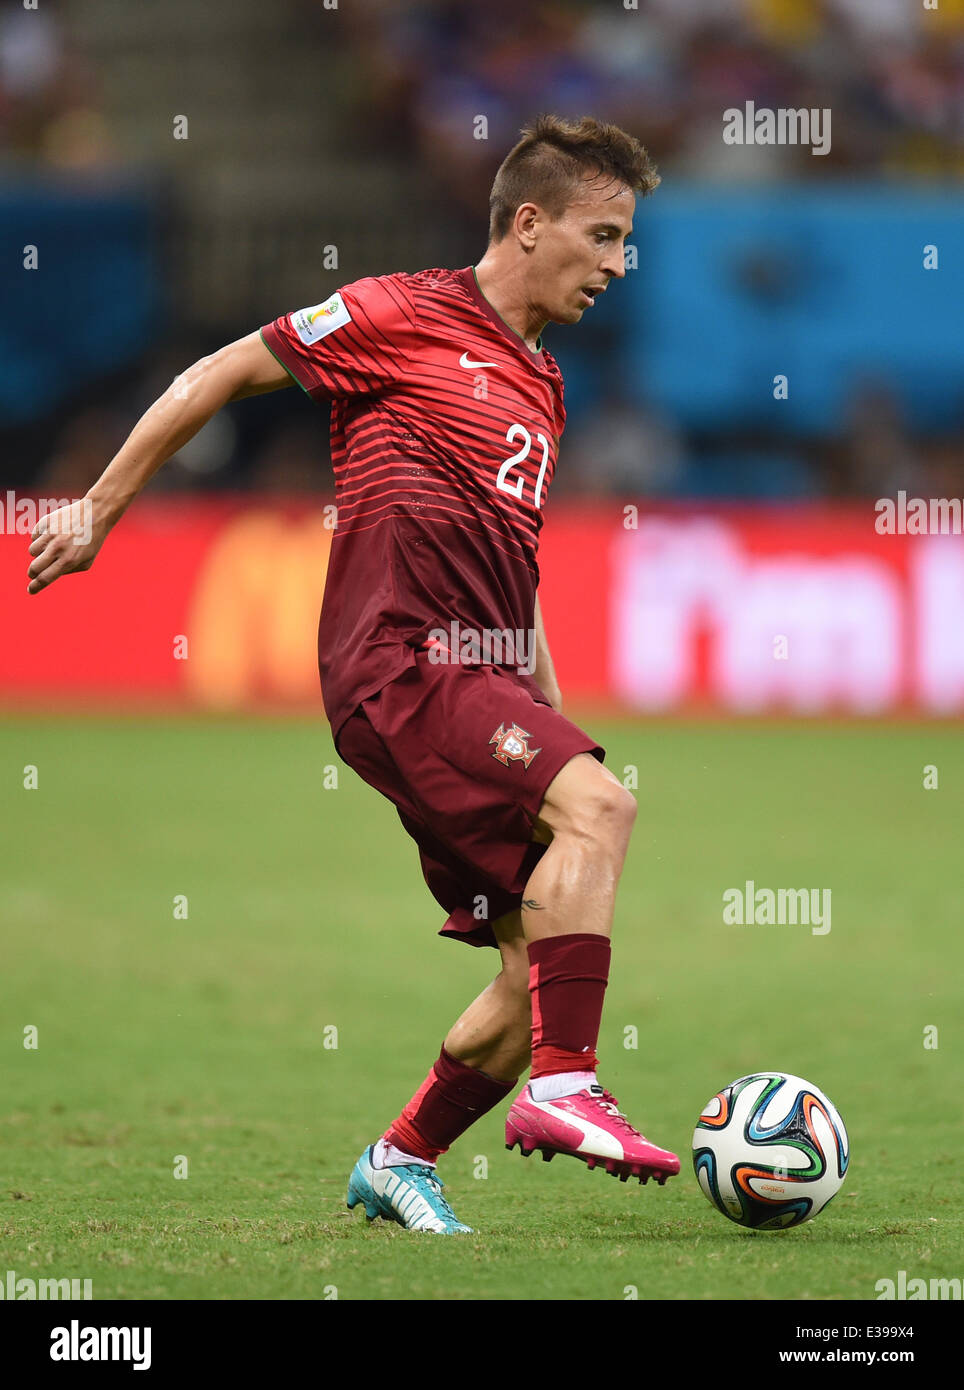 Manaus, Brazil. 22nd June, 2014. Joao Pereira of Portugal in action during the FIFA World Cup 2014 group G preliminary round match between the USA and Portugal at the Arena Amazonia Stadium in Manaus, Brazil, 22 June 2014. Photo: Marius Becker/dpa/Alamy Live News Stock Photo